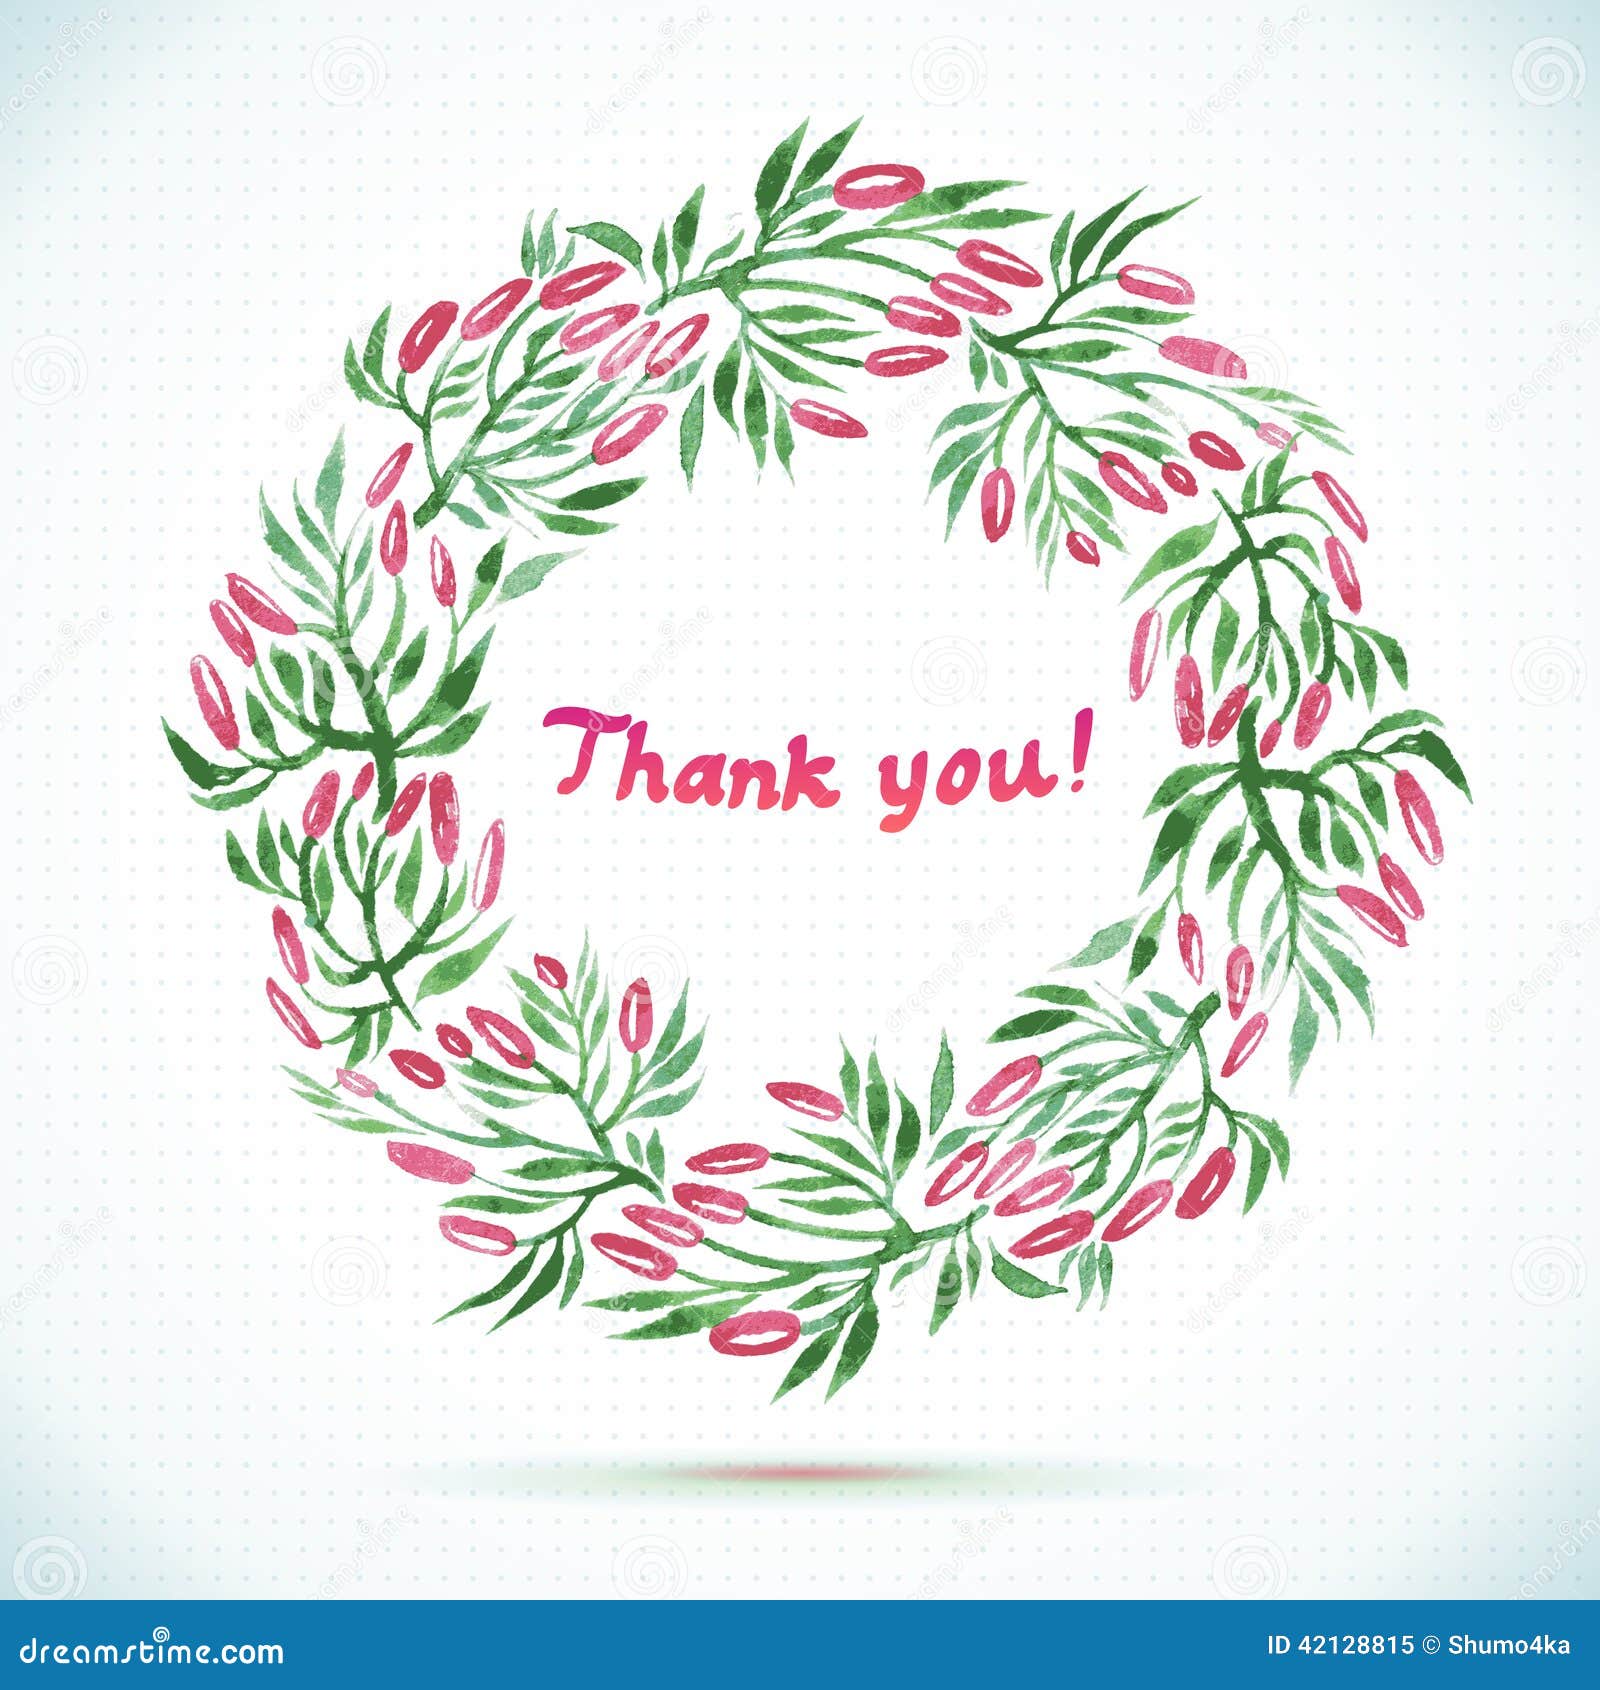 clip art for thank you with flowers - photo #49